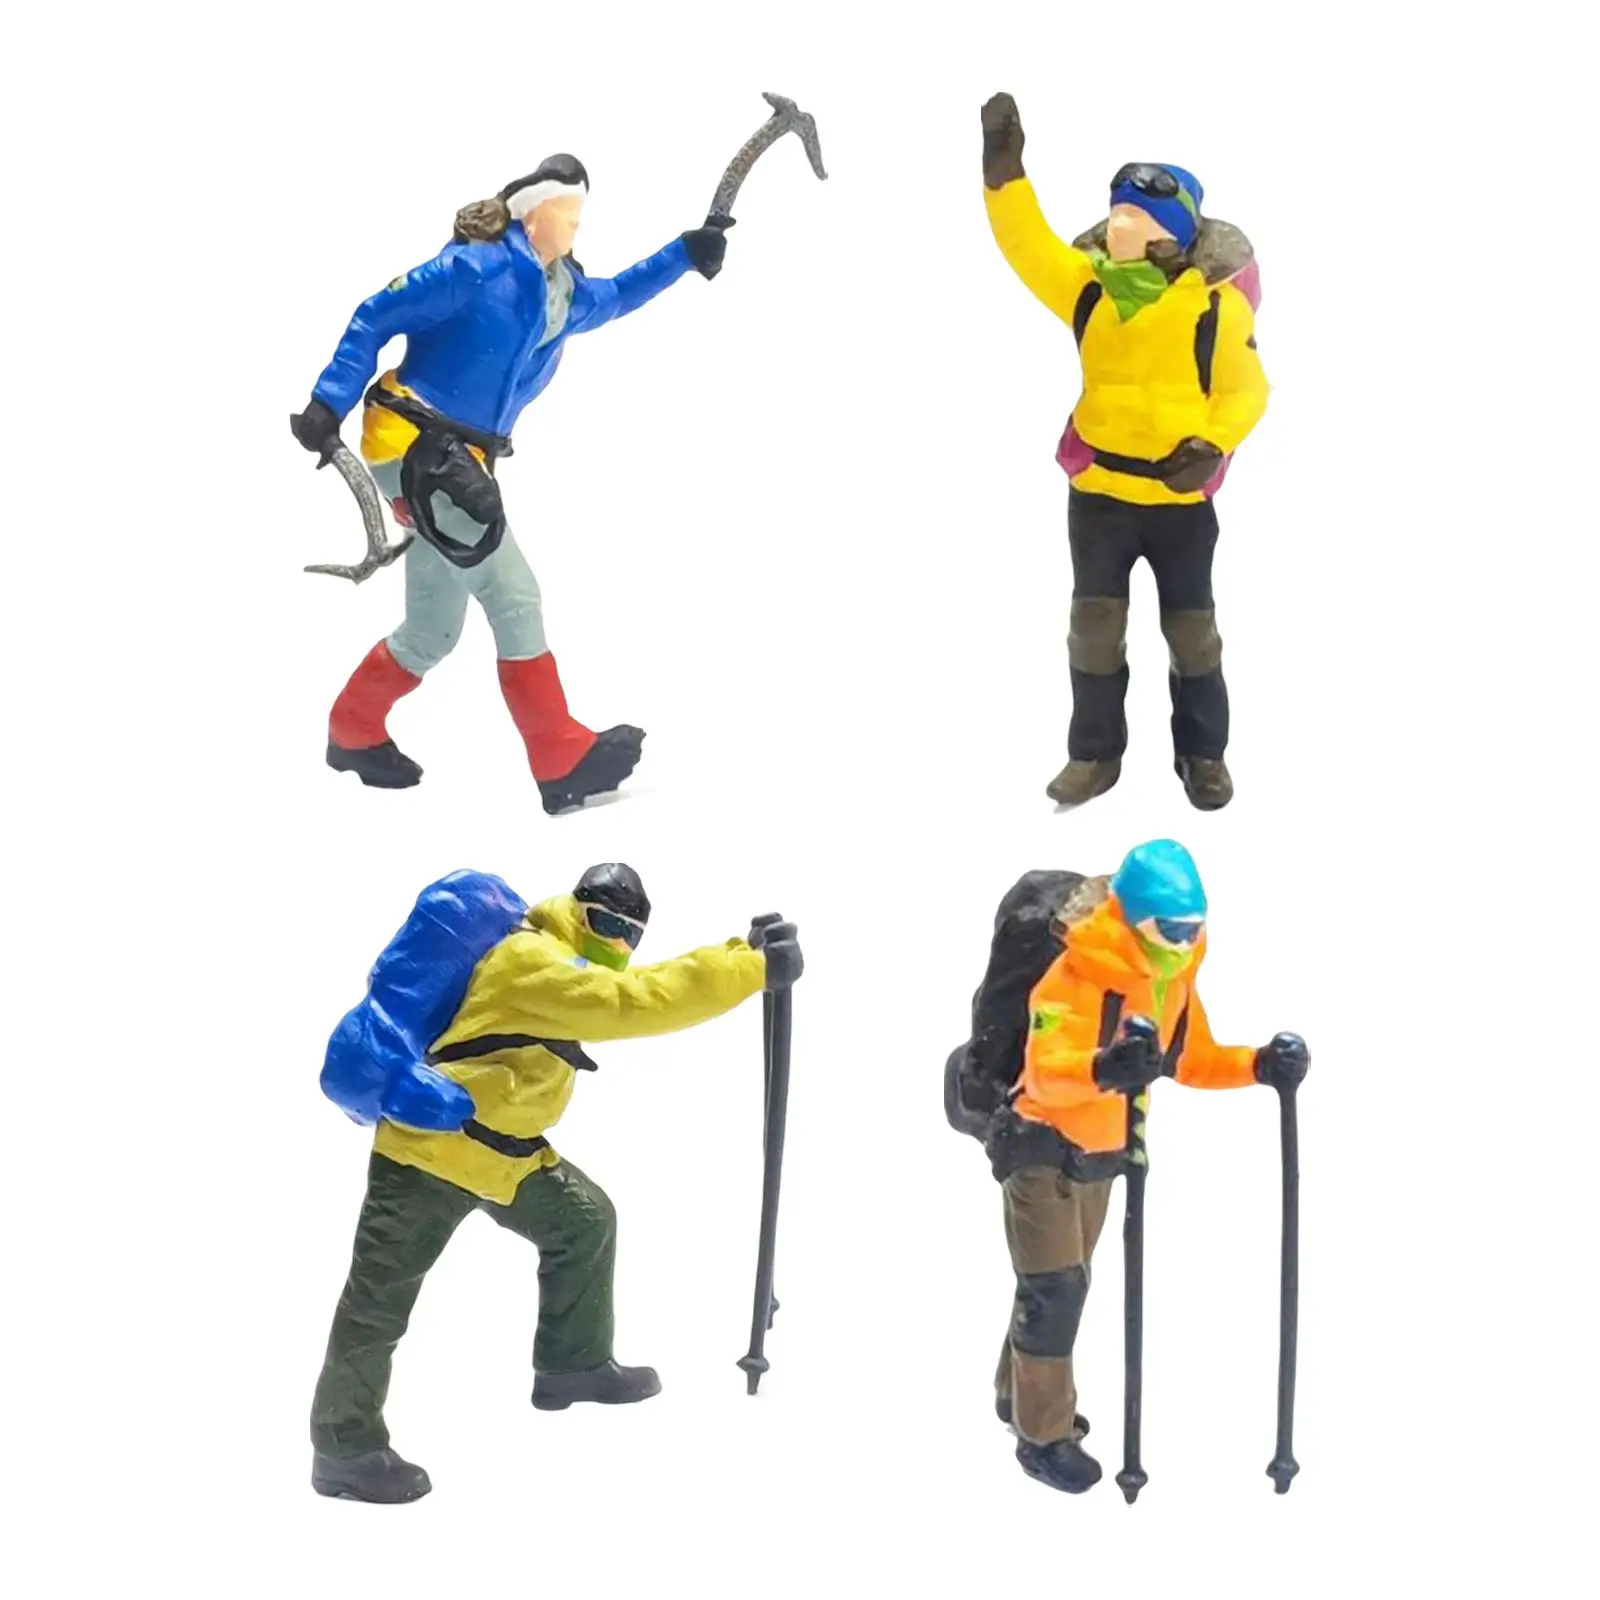 4 Pieces People Figurines Role Play Figure Tiny People Toys for Pretend Play